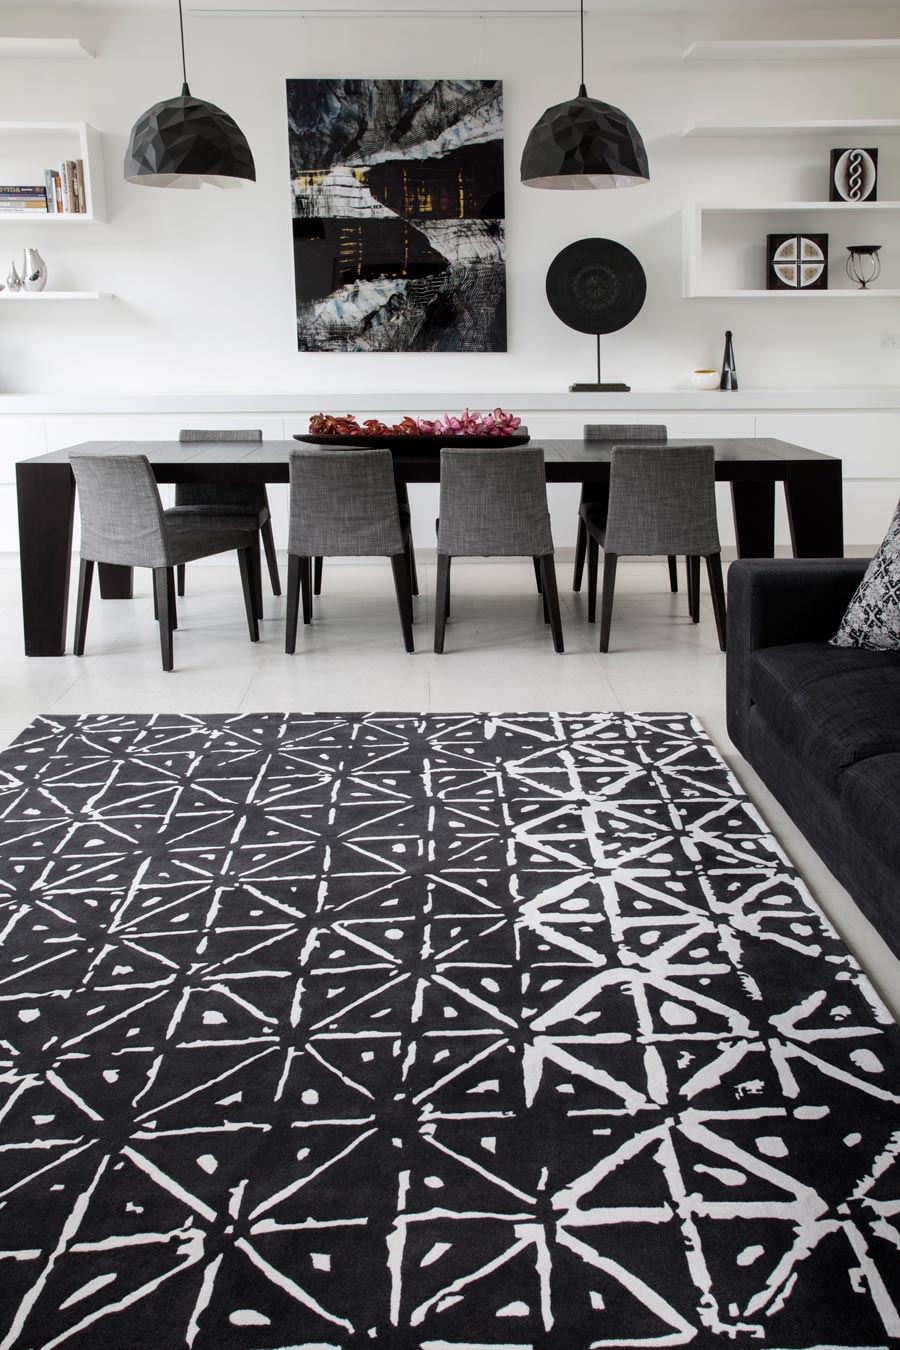 location living room shot of batik rug by akira with a black background and white dots and dashes pattern